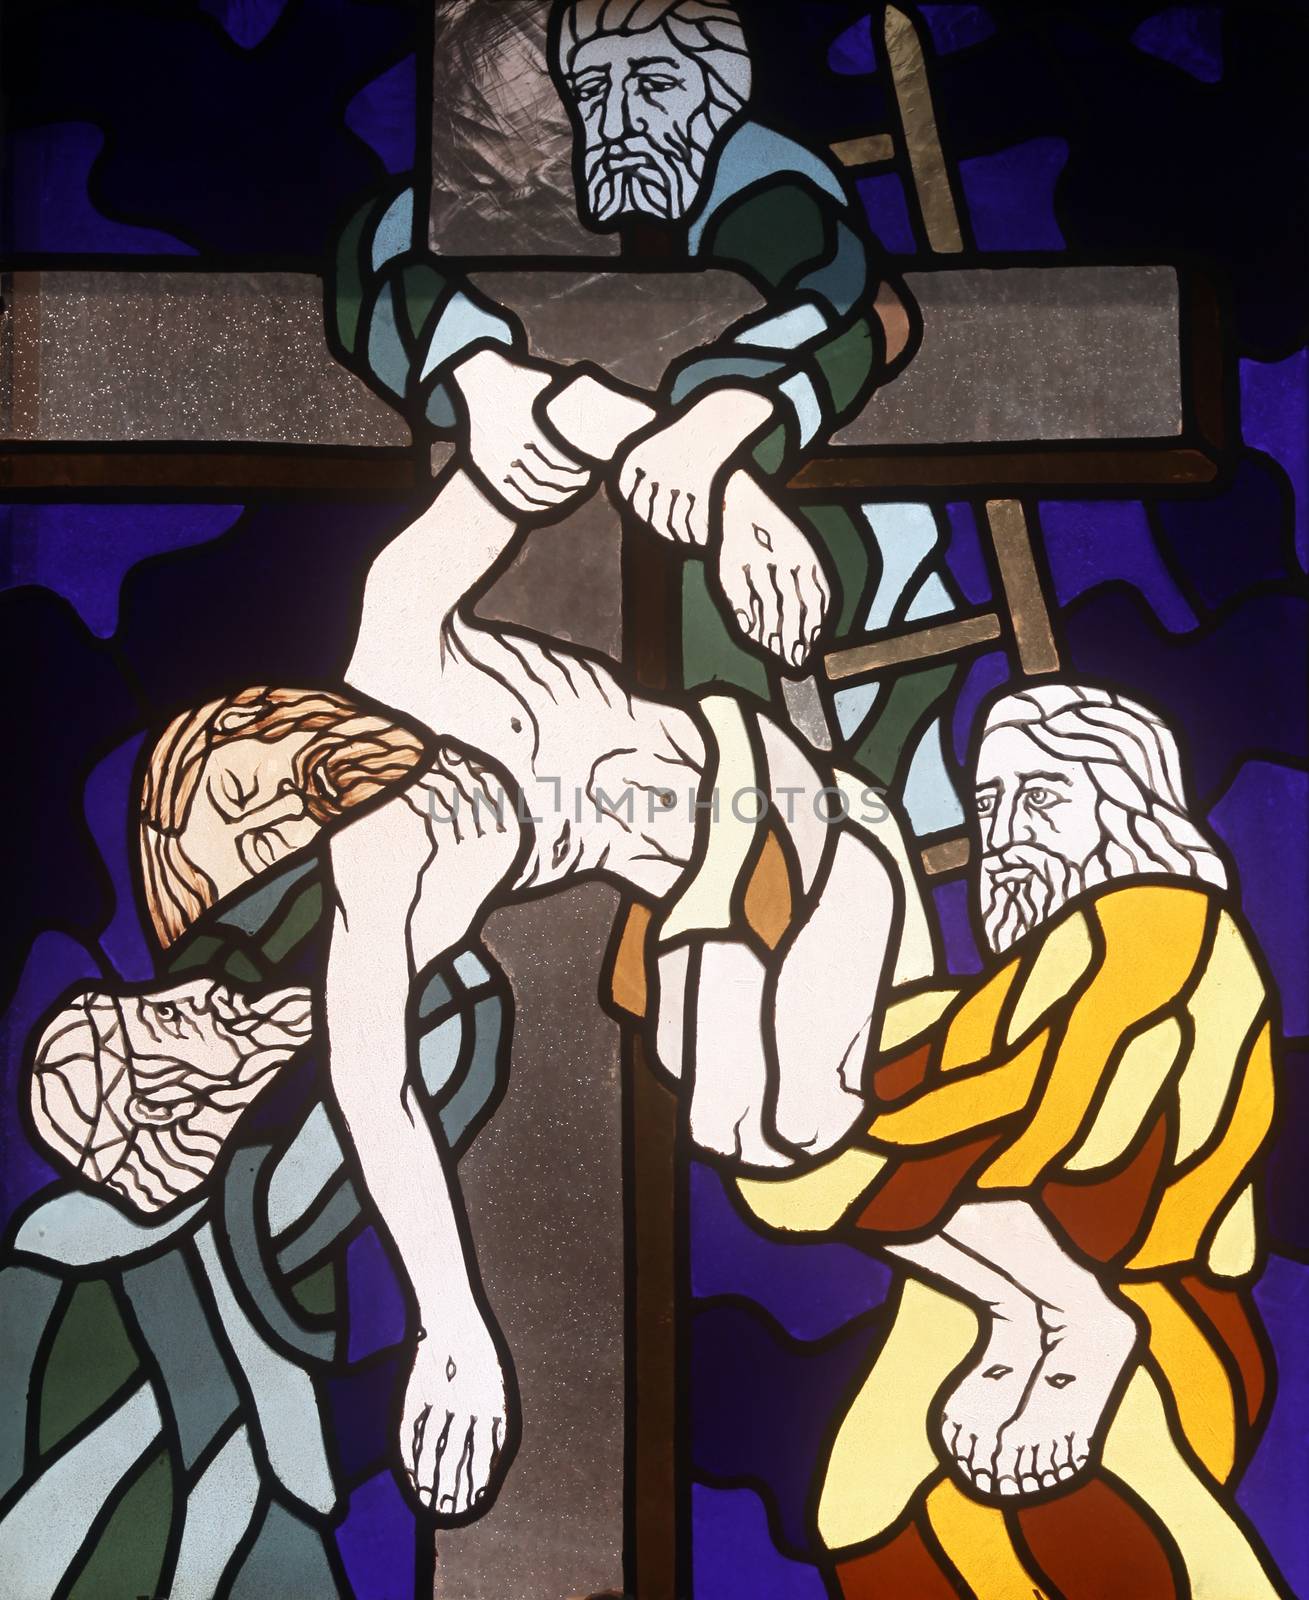 13th Stations of the Cross, Jesus' body is removed from the cross by atlas